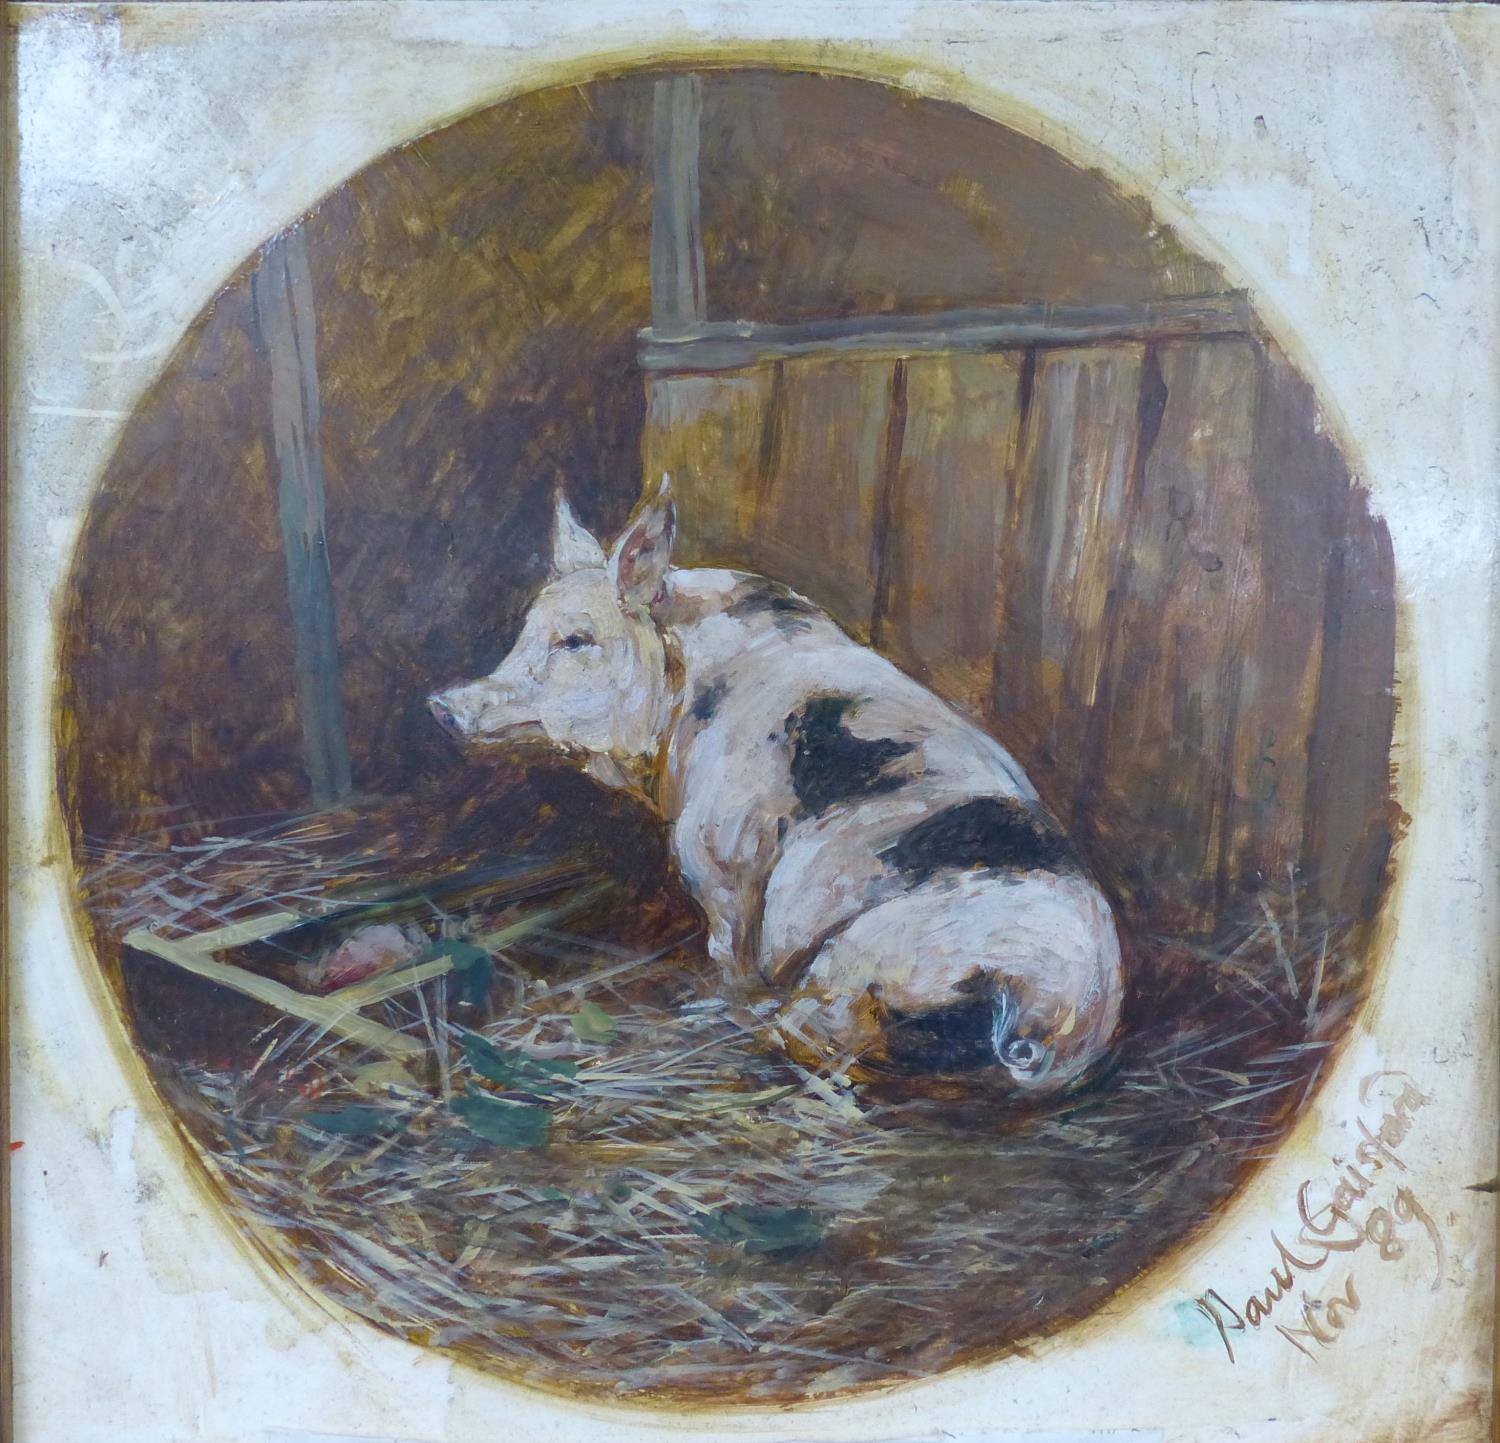 Paul Gaisford, oil on board, Pig in a stye, signed and dated '89, 30 x 29cm